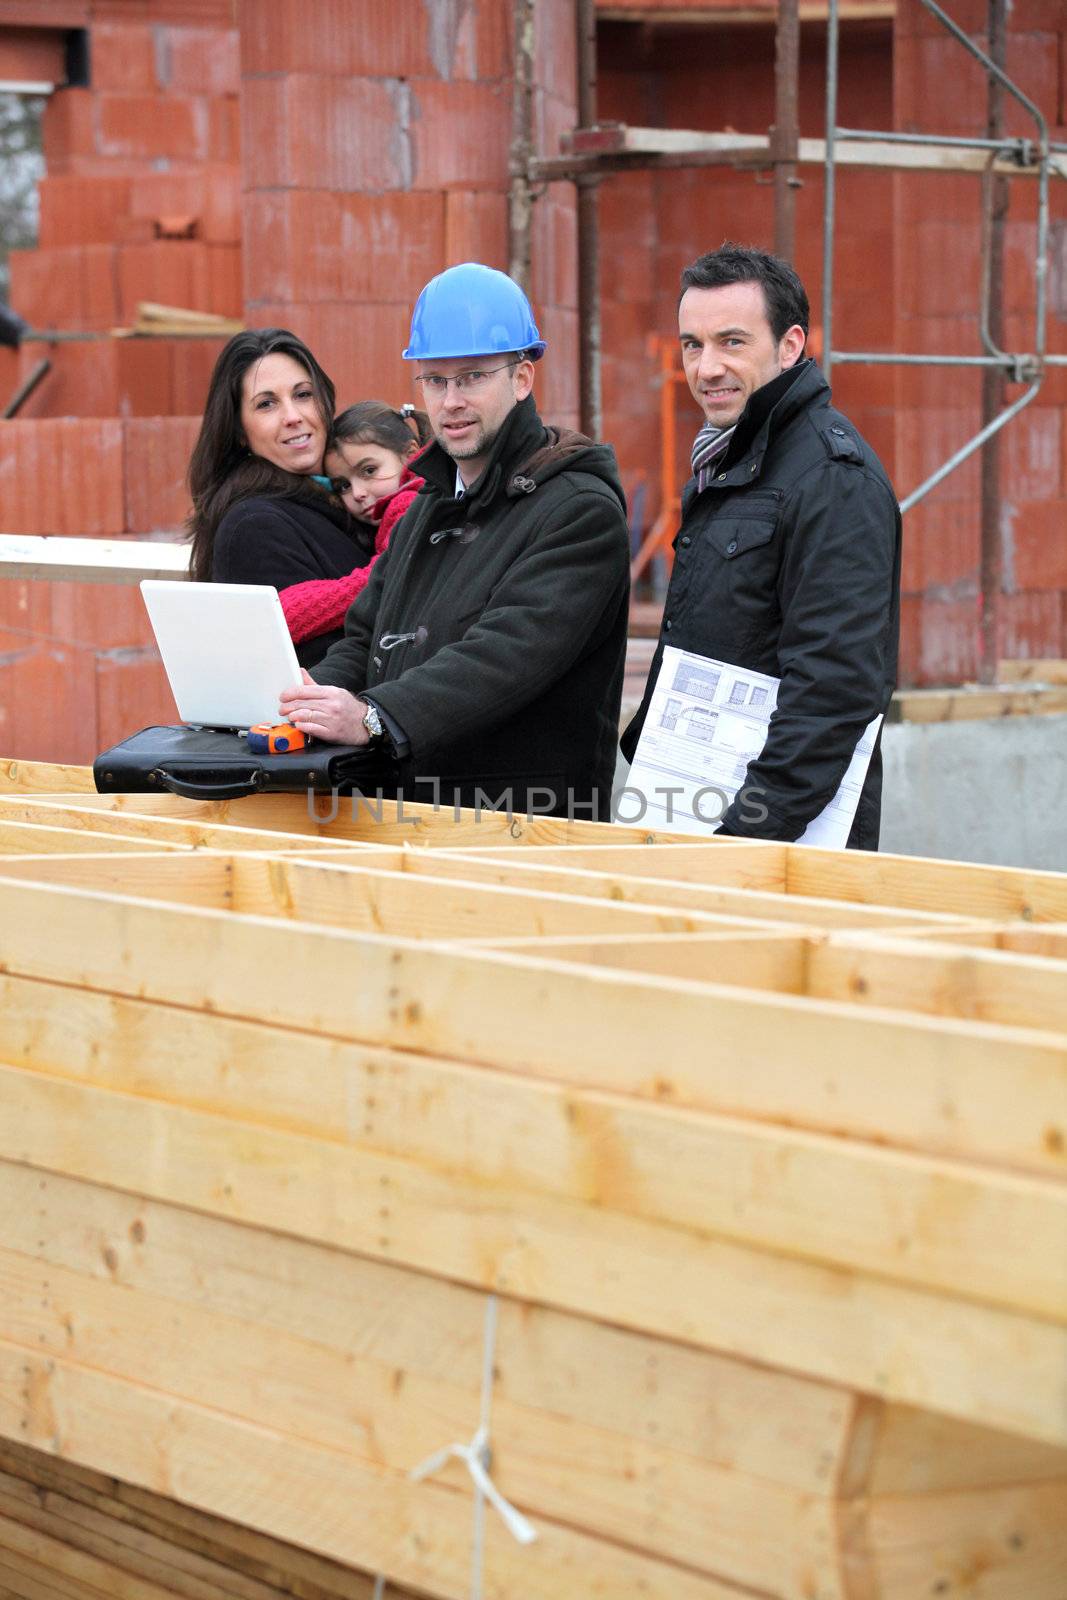 Architect with young family at construction site by phovoir